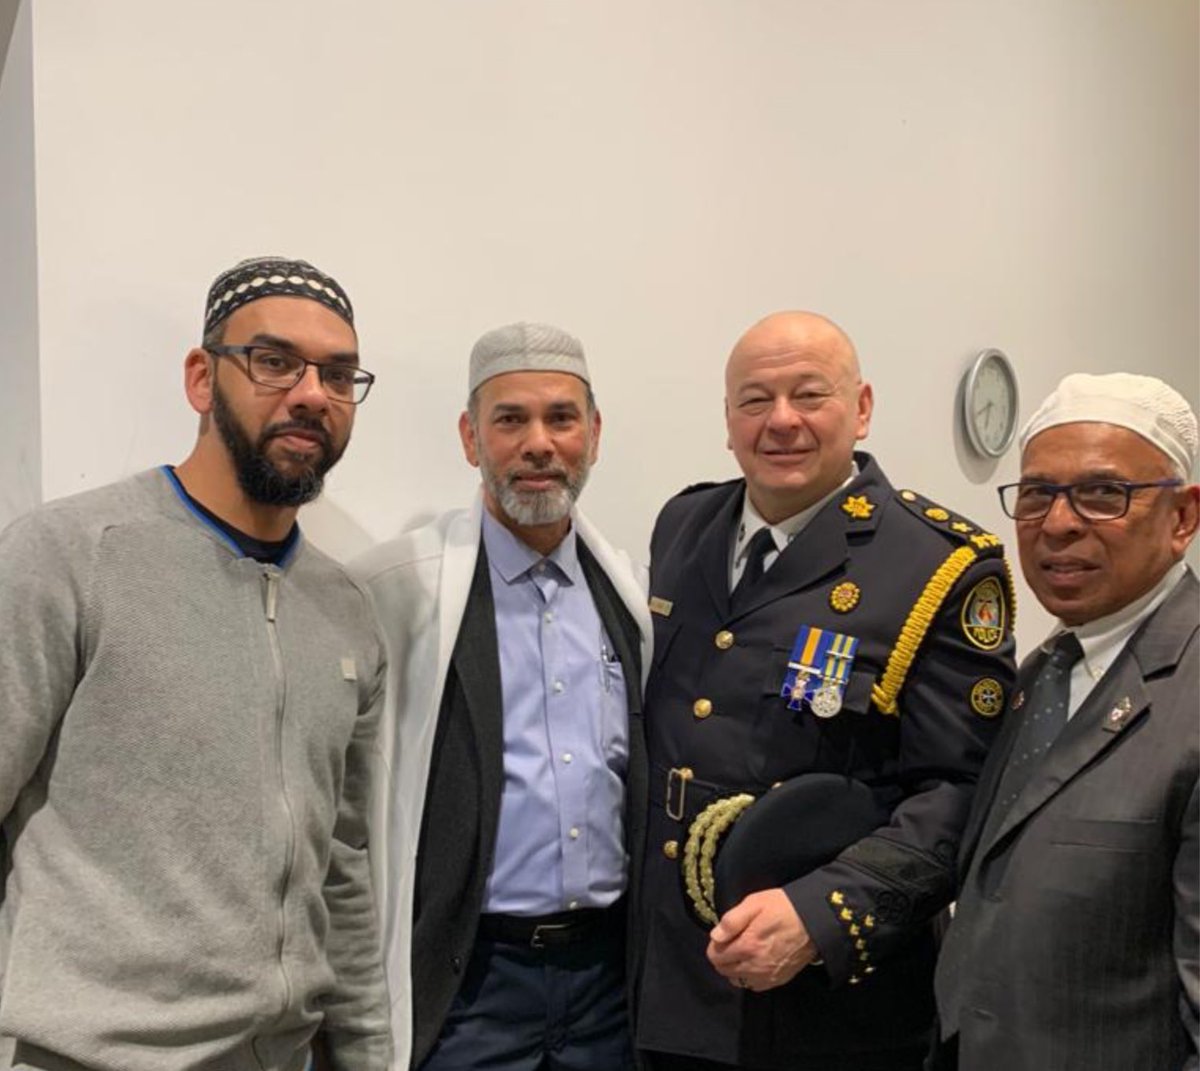 It was a wonderful evening at the Imdadul Islamic Centre. Grateful for the generous hospitality provided by the Board of Directors and the broader community, including the dedicated members of @TorontoPolice Muslim Consultative Committee